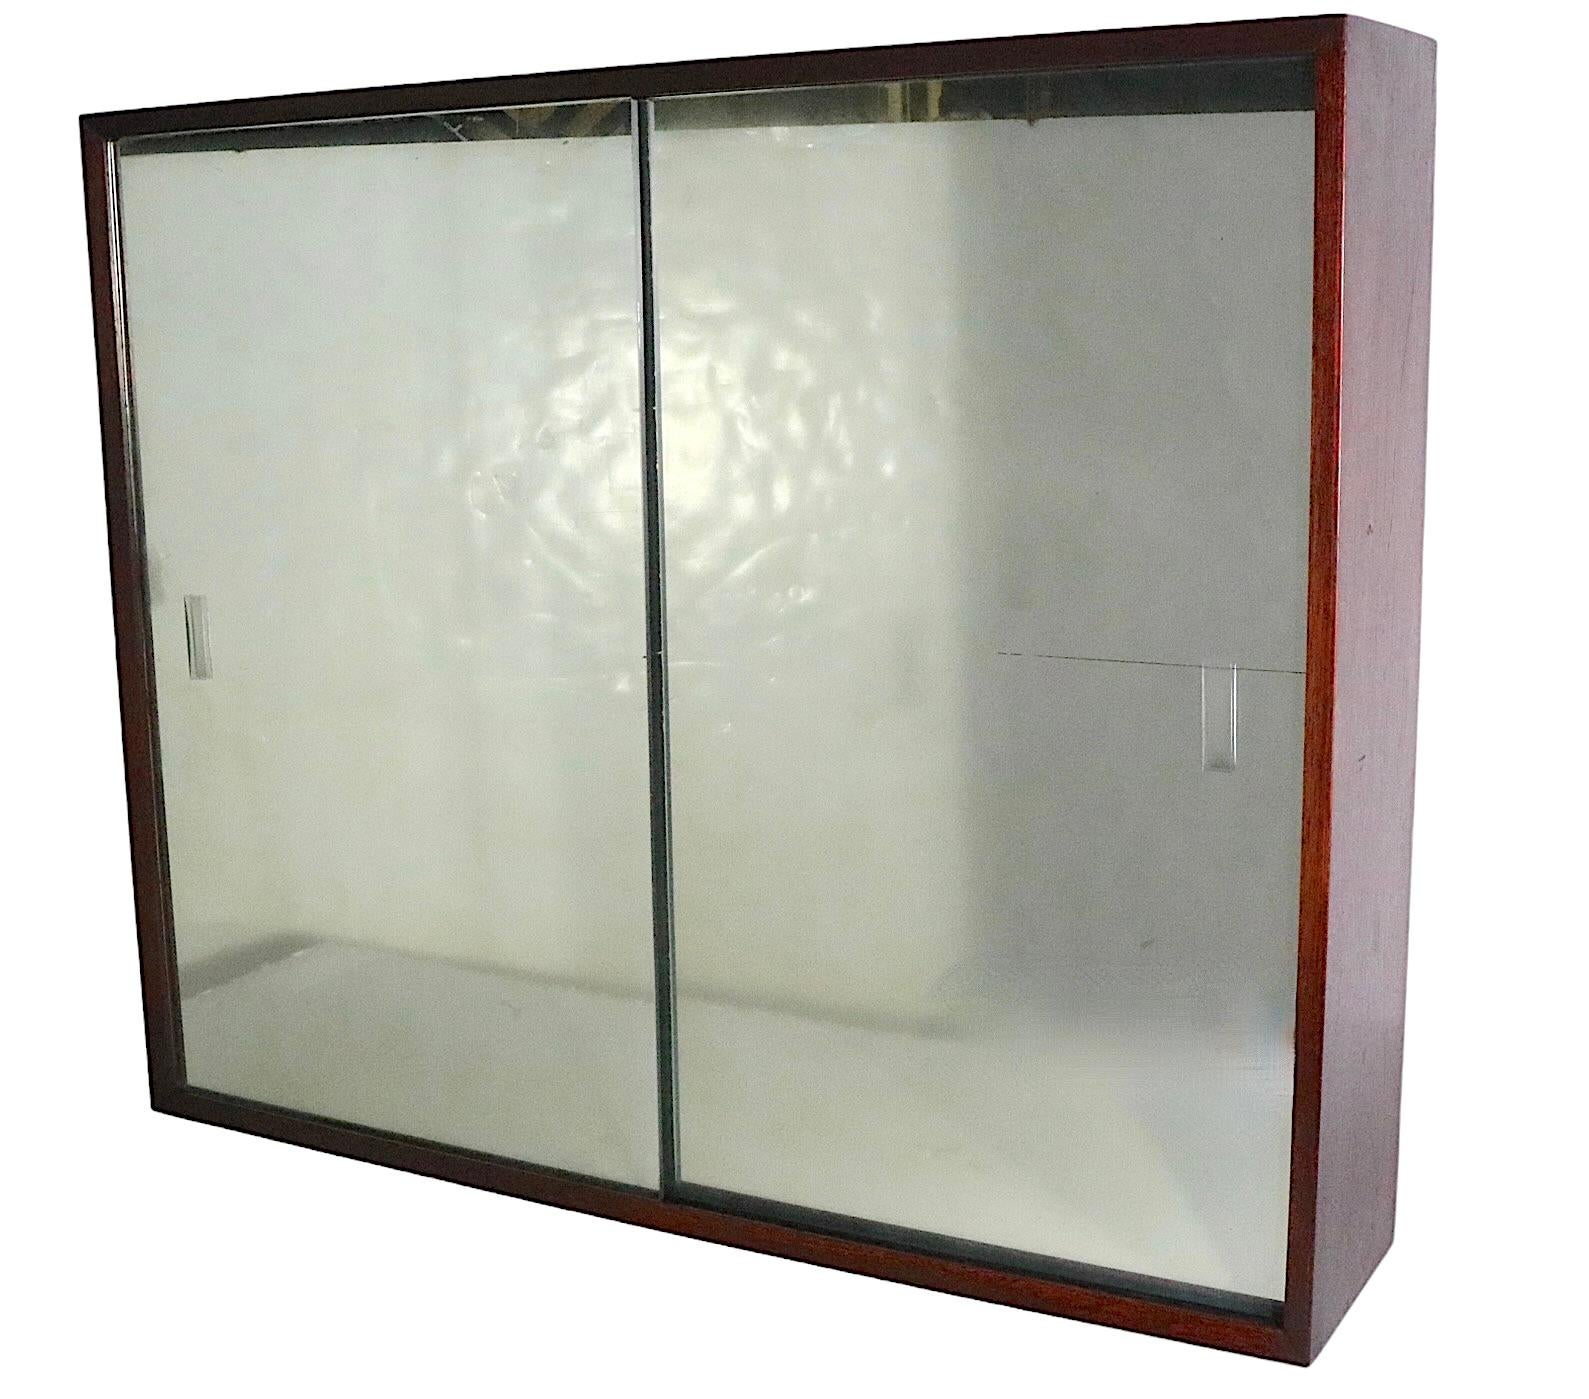 Danish Mid Century Wall Hanging Cabinet with Sliding Mirrored Doors, circa 1950s For Sale 8